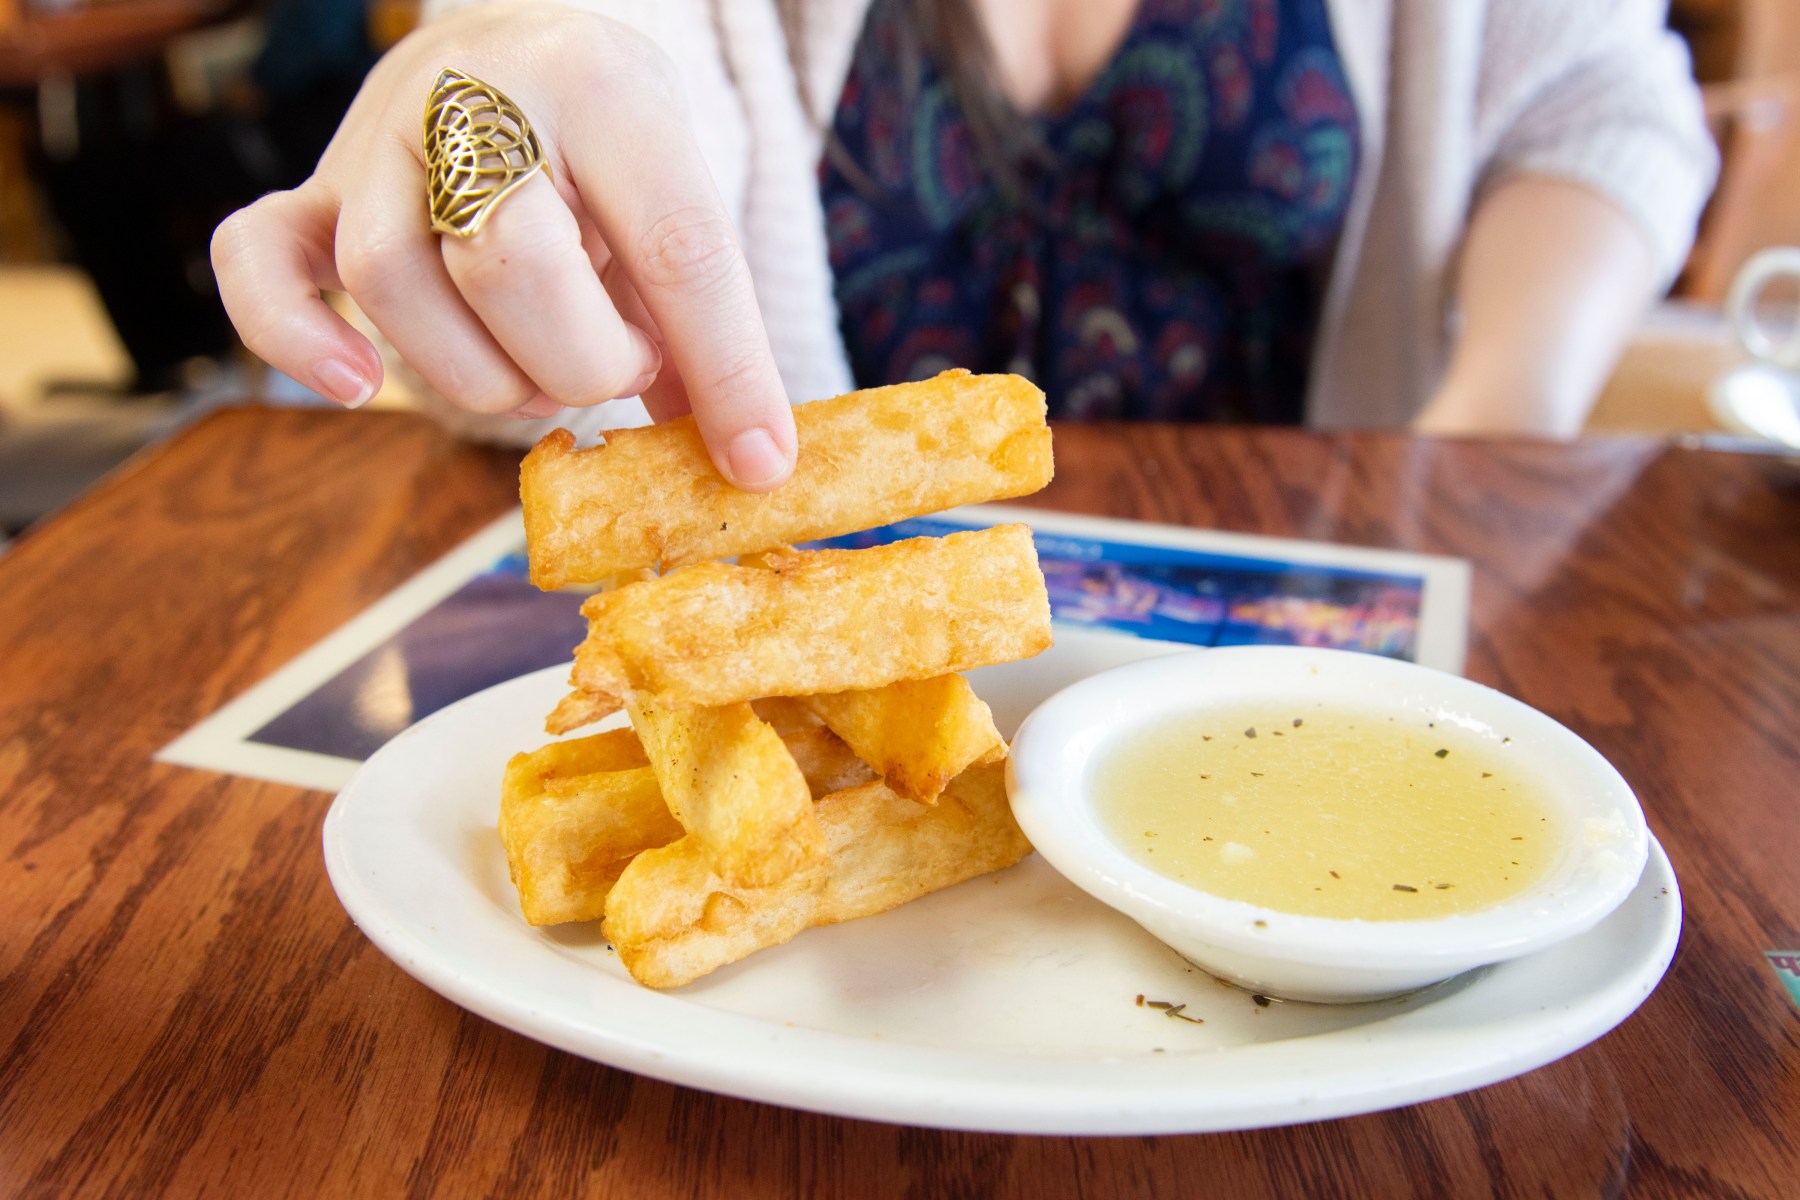 Before our food comes, we’re given little white paper bags filled with silver utensils. We start the meal with<br>yuca fries, which come in a neat little stack and a delectable lemon-garlic dipping sauce. The yuca<br>crunches on its own, a soft, buttery tang added by the sauce.